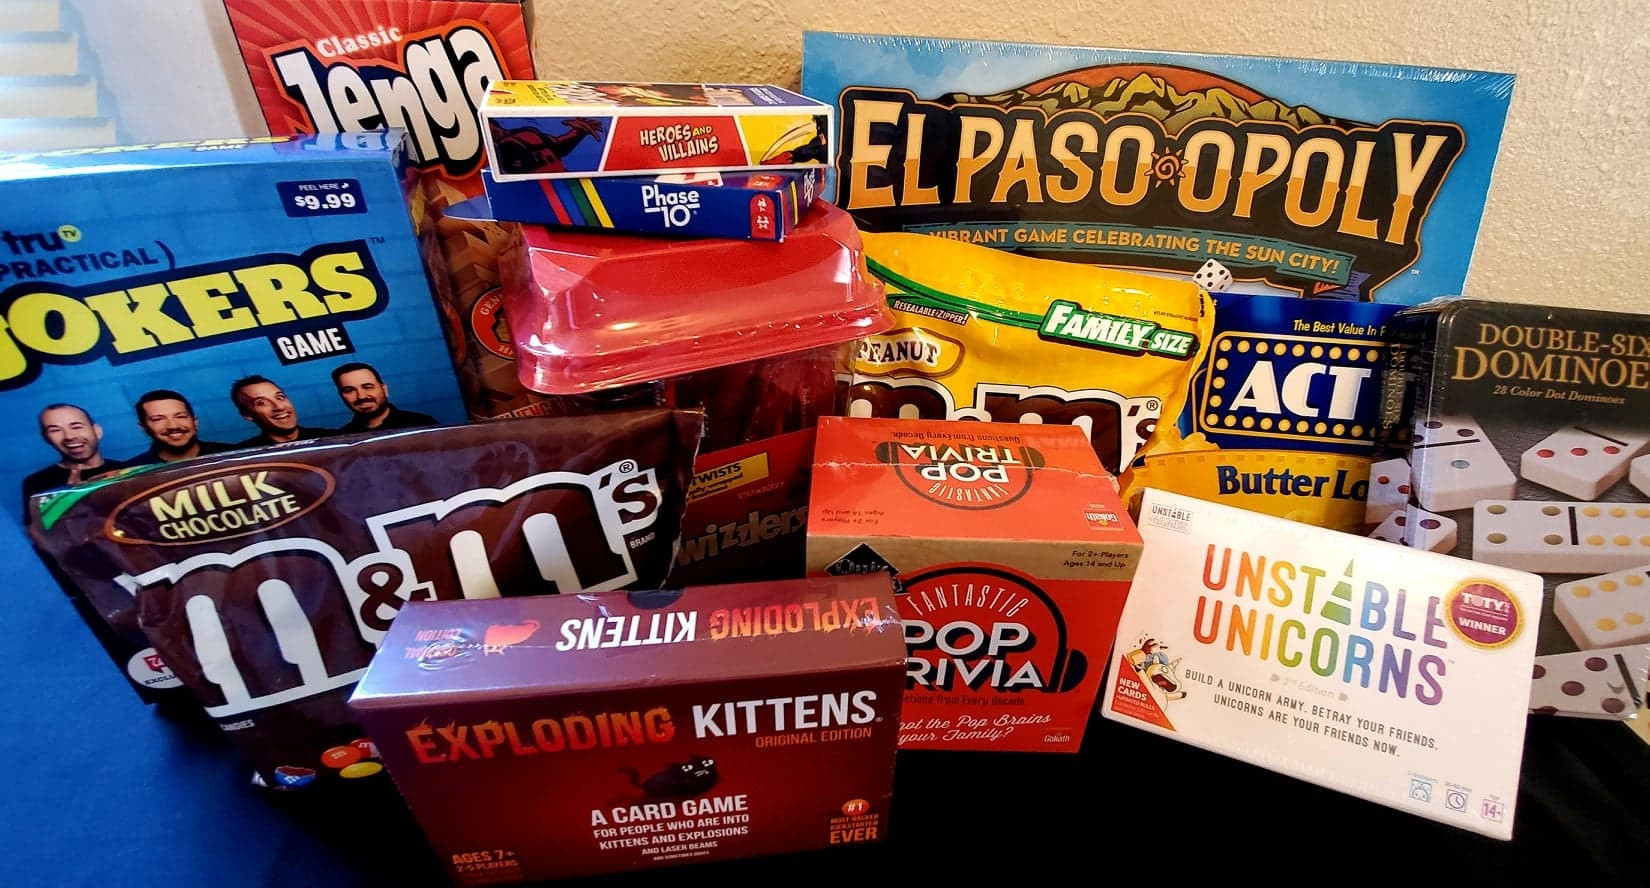 9 games including the El Paso Monopoly version, 4lbs of candy, 1 box of popcorn and red popcorn bowl (no pictured) with a large basket for storage (not pictured).